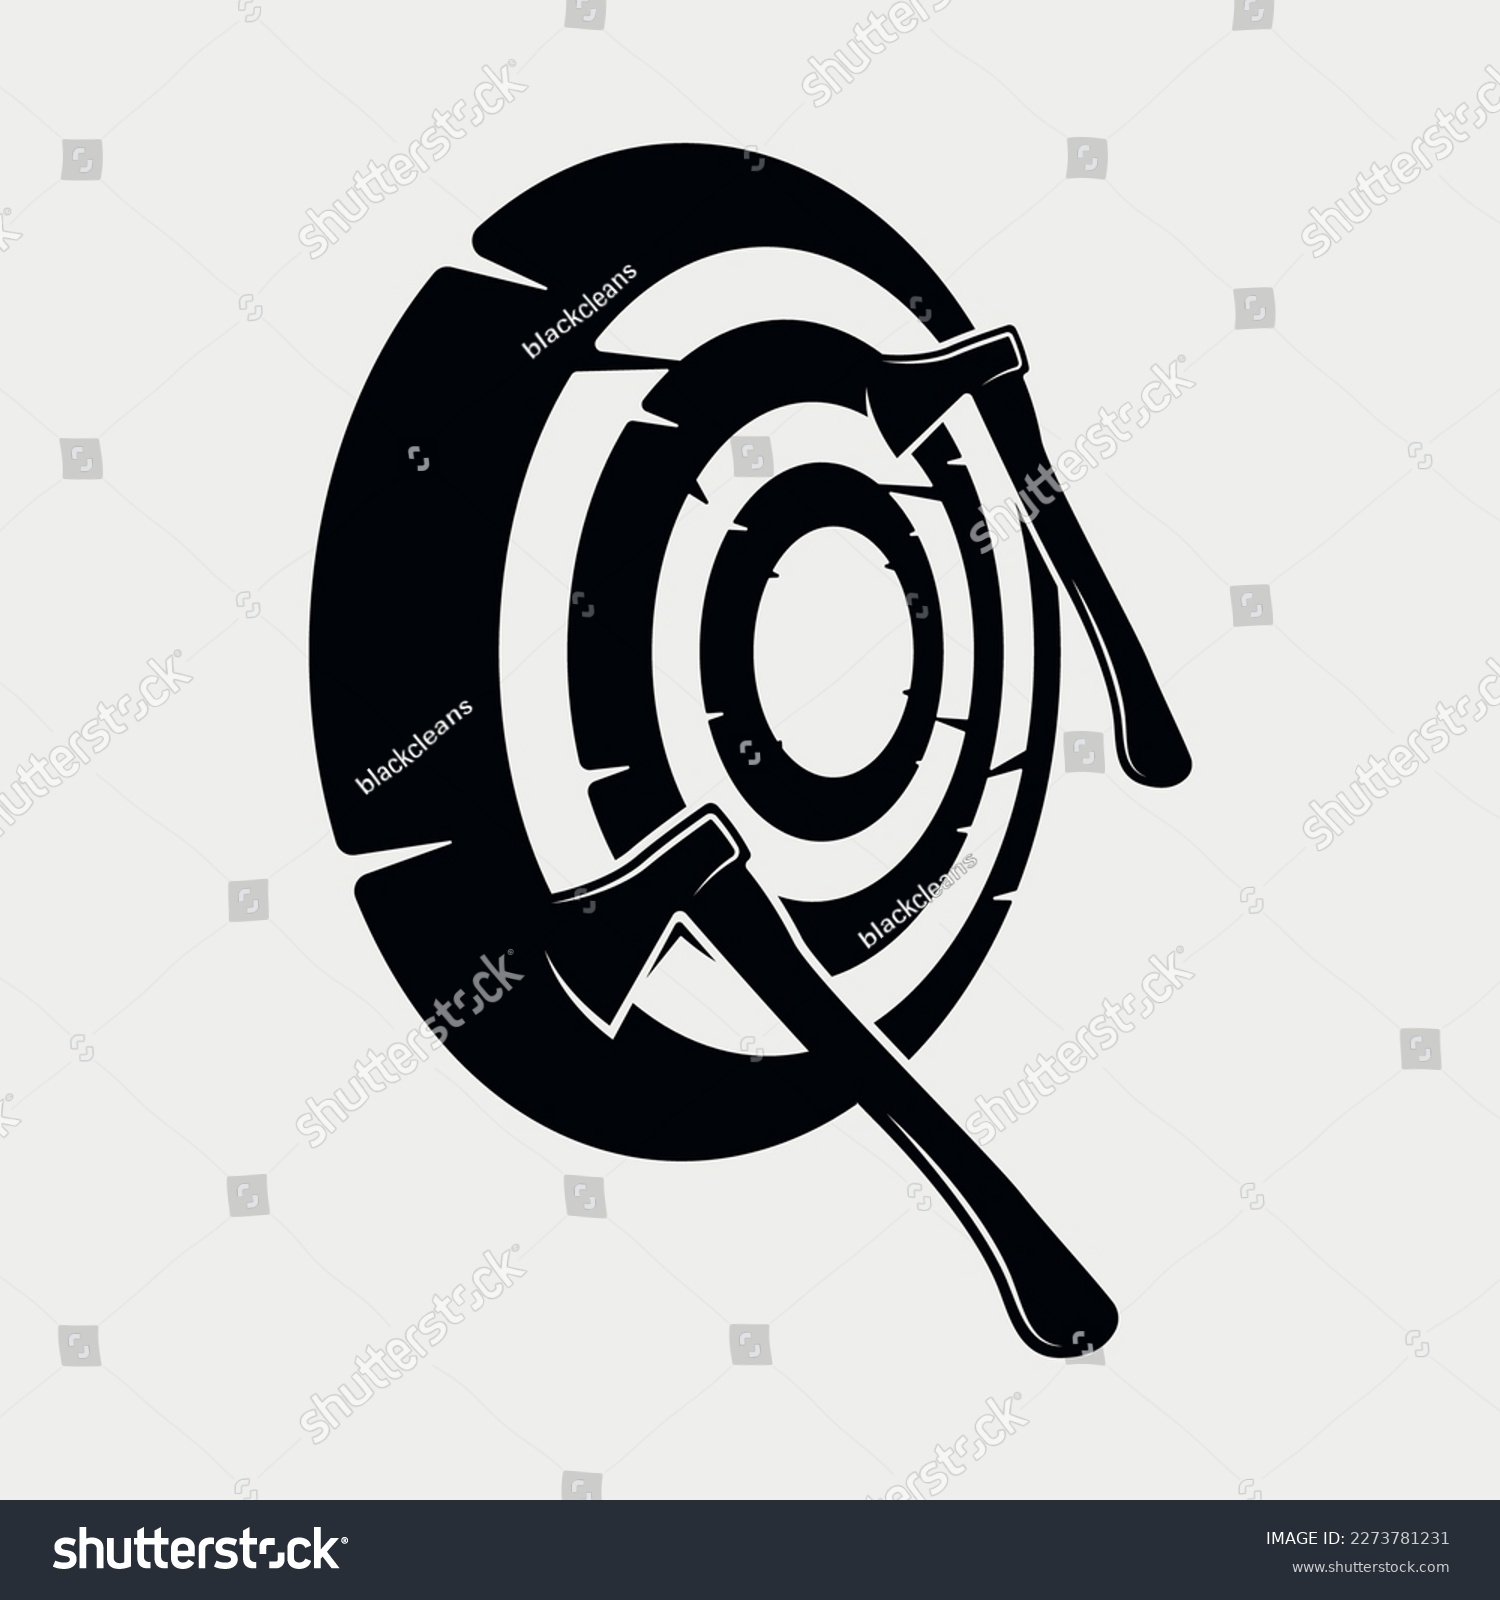 SVG of Vintage throwing axe icon illustration simple design element logo template. svg